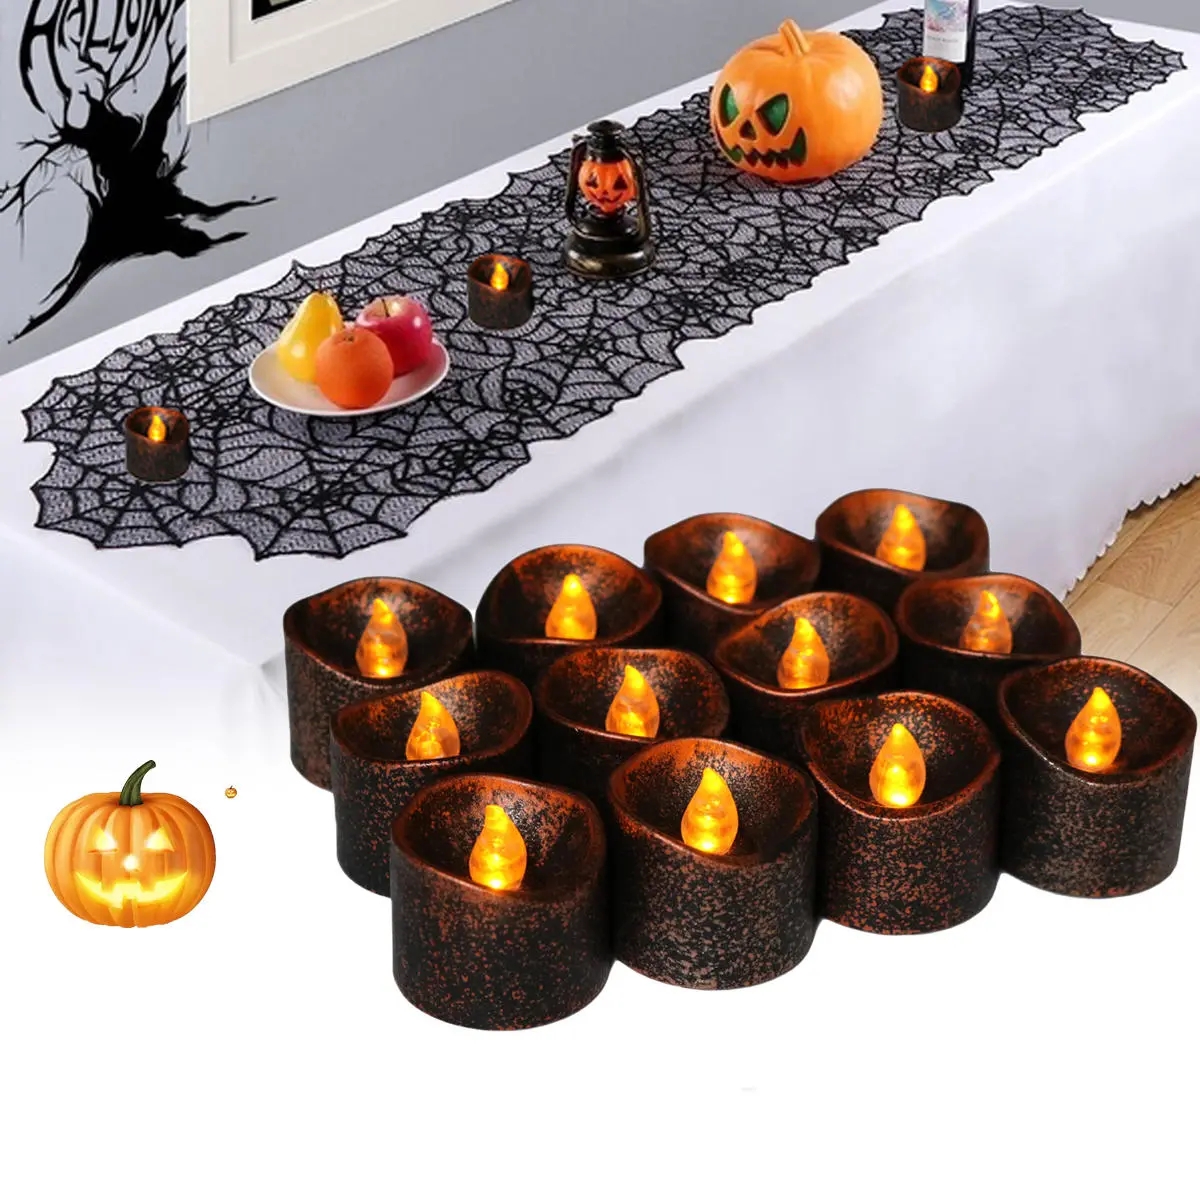 12PCS-Halloween-Battery-Operated-Party-Decoration-Electronic-Flickering-LED-Candle-Lamp-Yellow-1893460-3